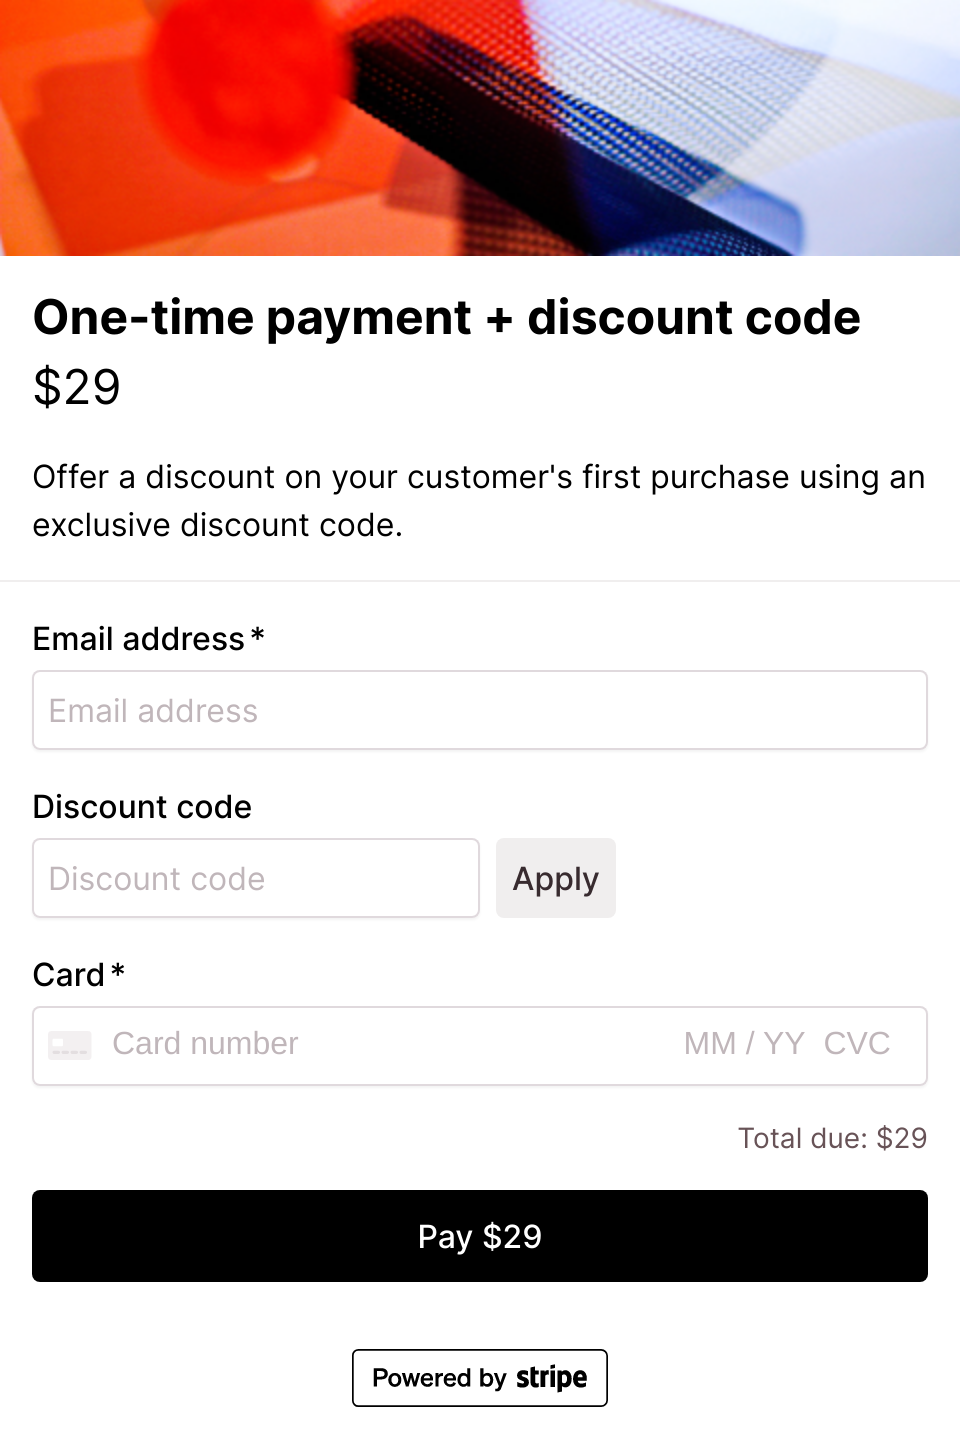 One-time payment with coupon code checkout form